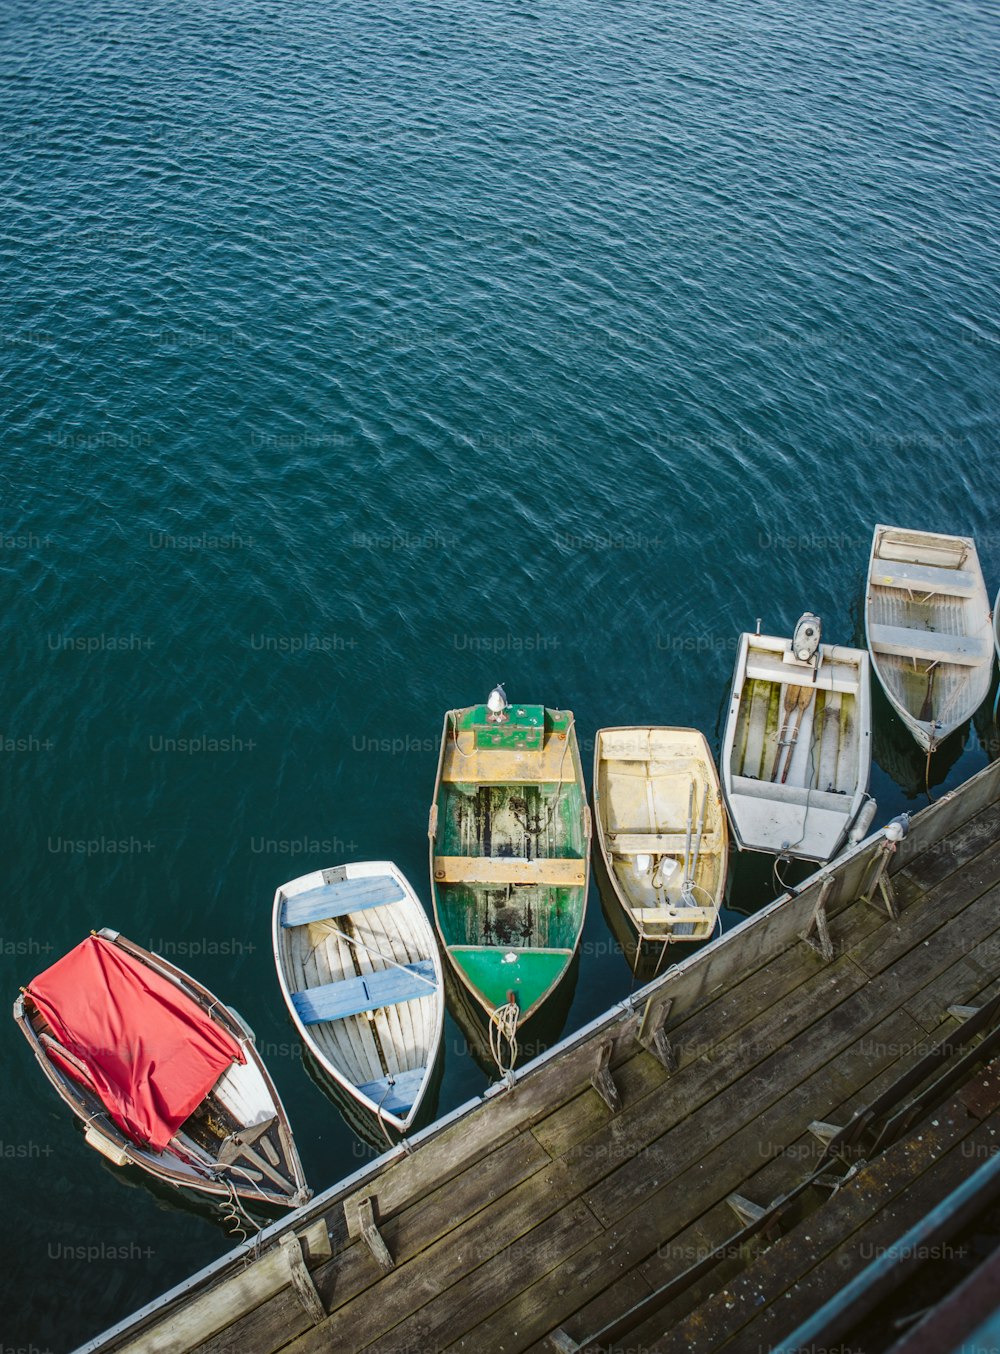 a group of small boats sitting on top of a body of water